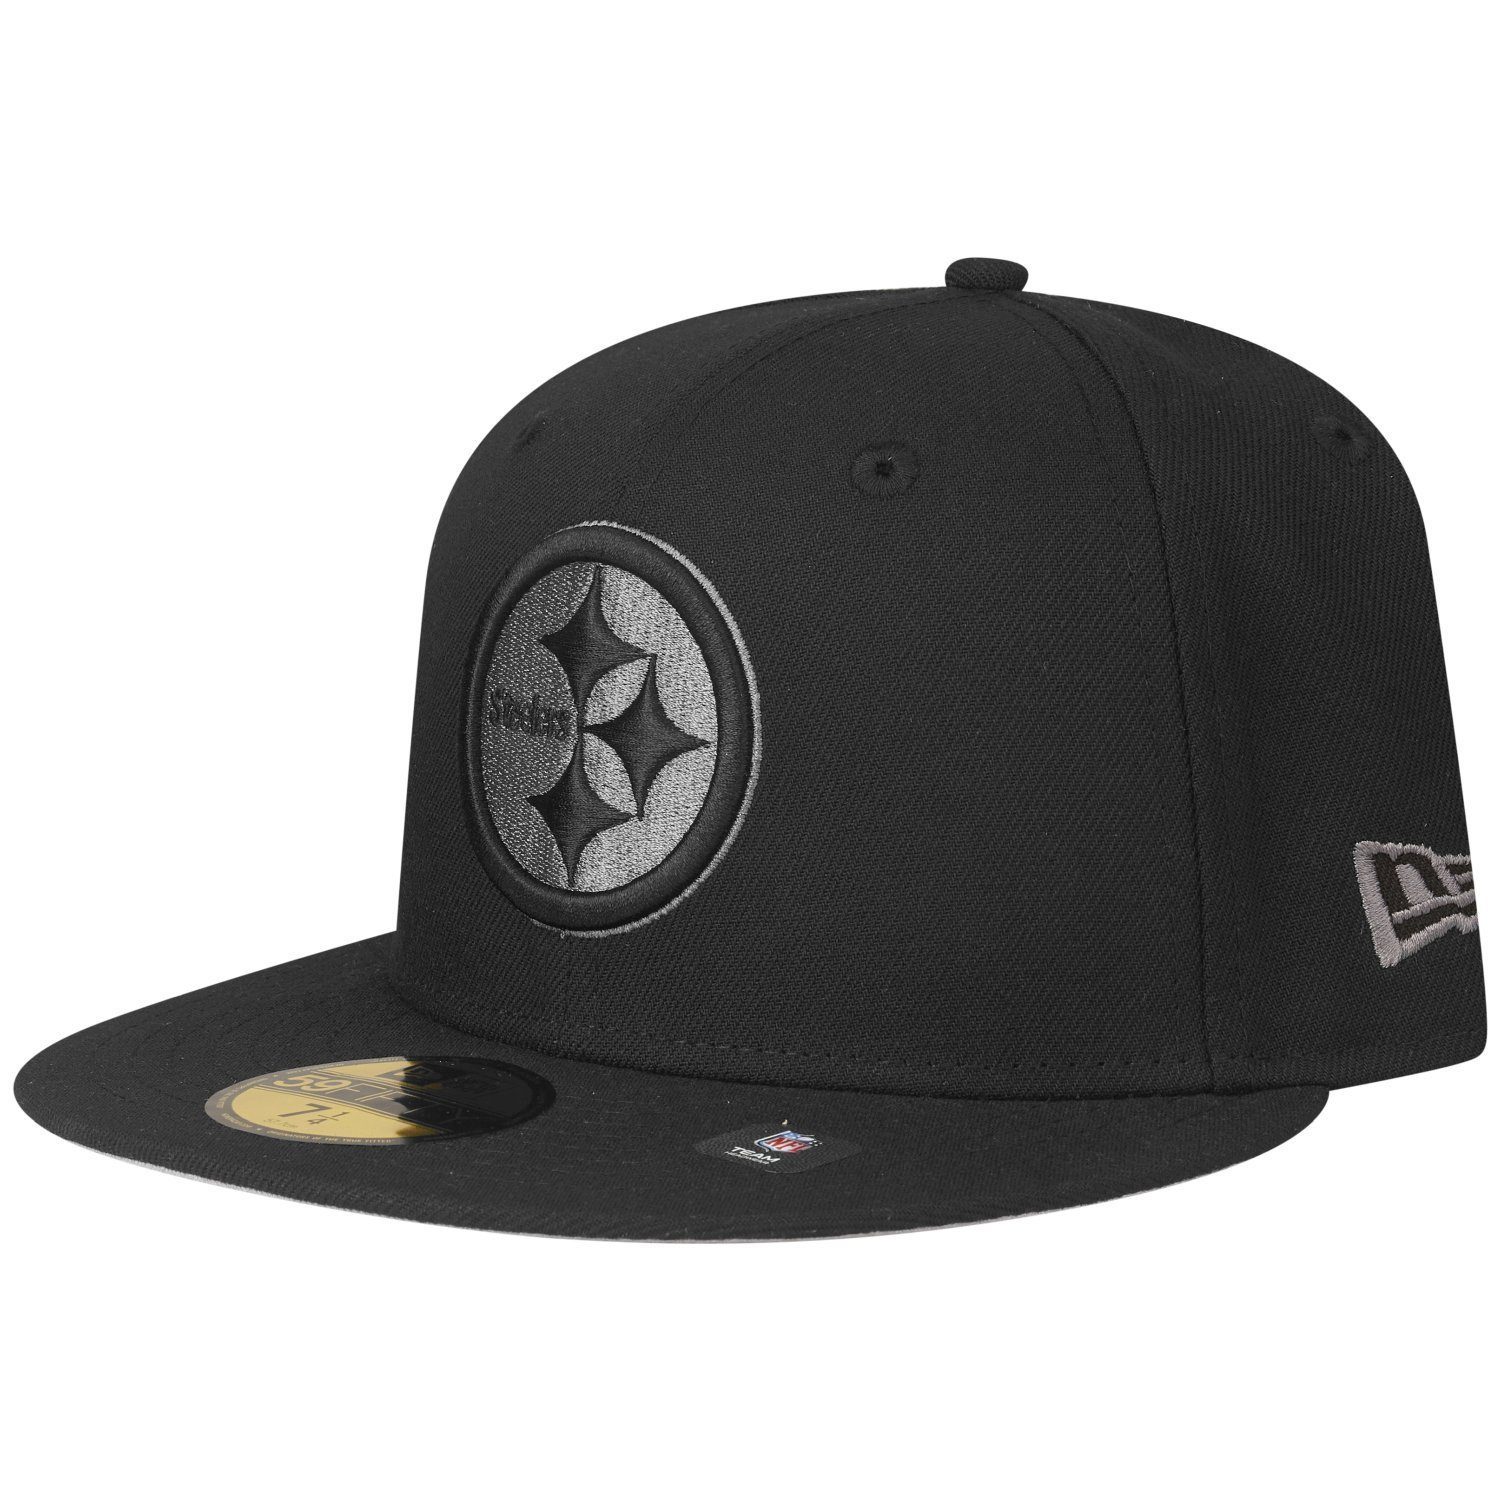 New Era Fitted Cap 59Fifty NFL TEAMS Pittsburgh Steelers